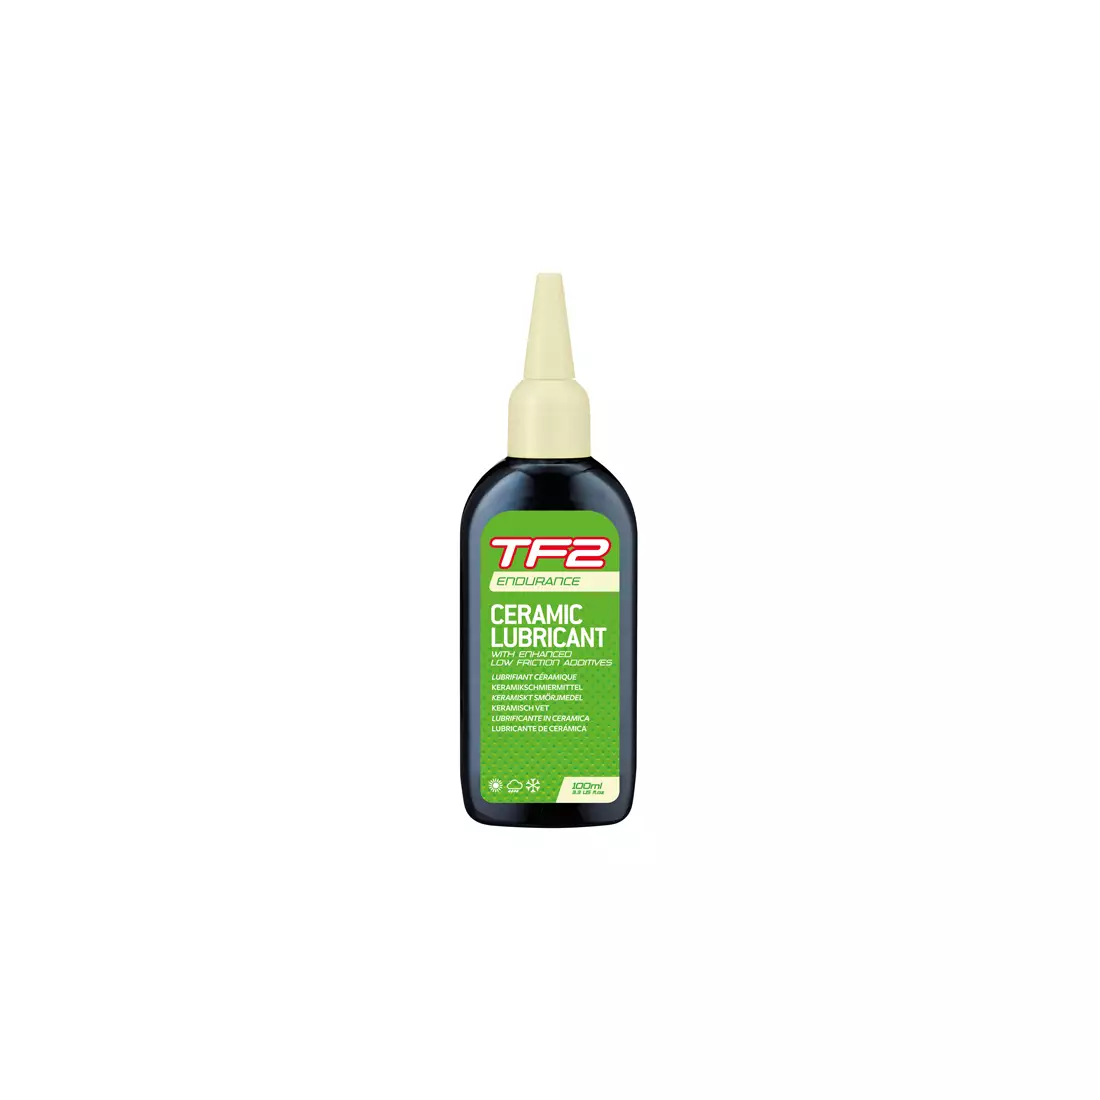 WELDTITE chain oil tf2 endurance ceramic lubricant (dry and wet conditions) 100ml WLD-03065